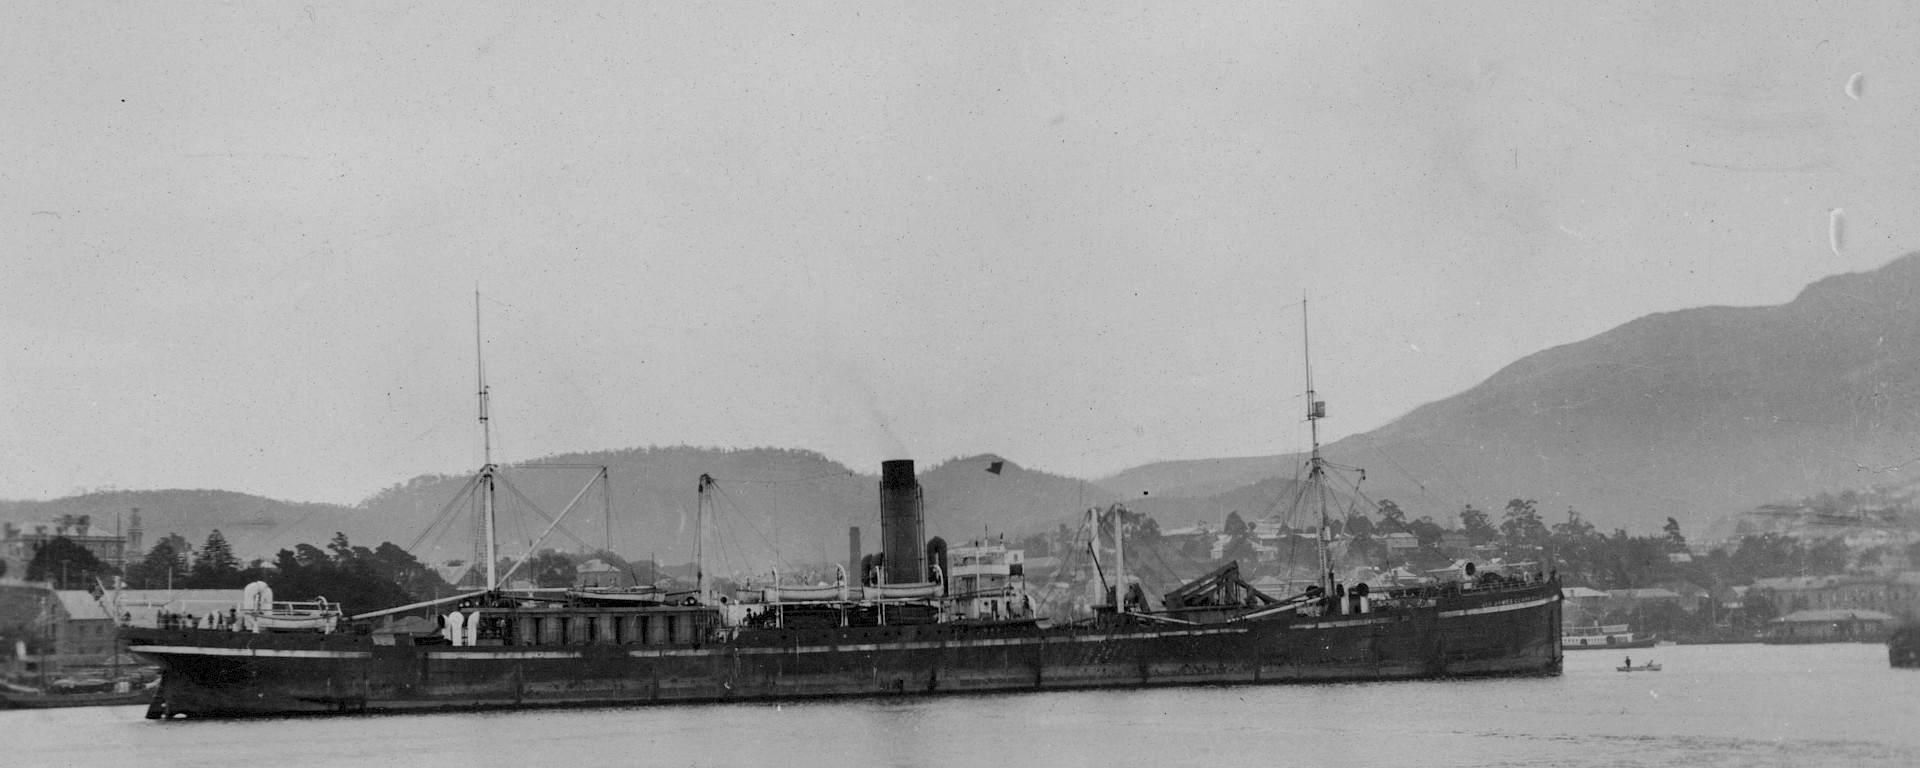 Whale factory ship Sir James Clark Ross, 8224 tons, arriving at Hobart November 1923